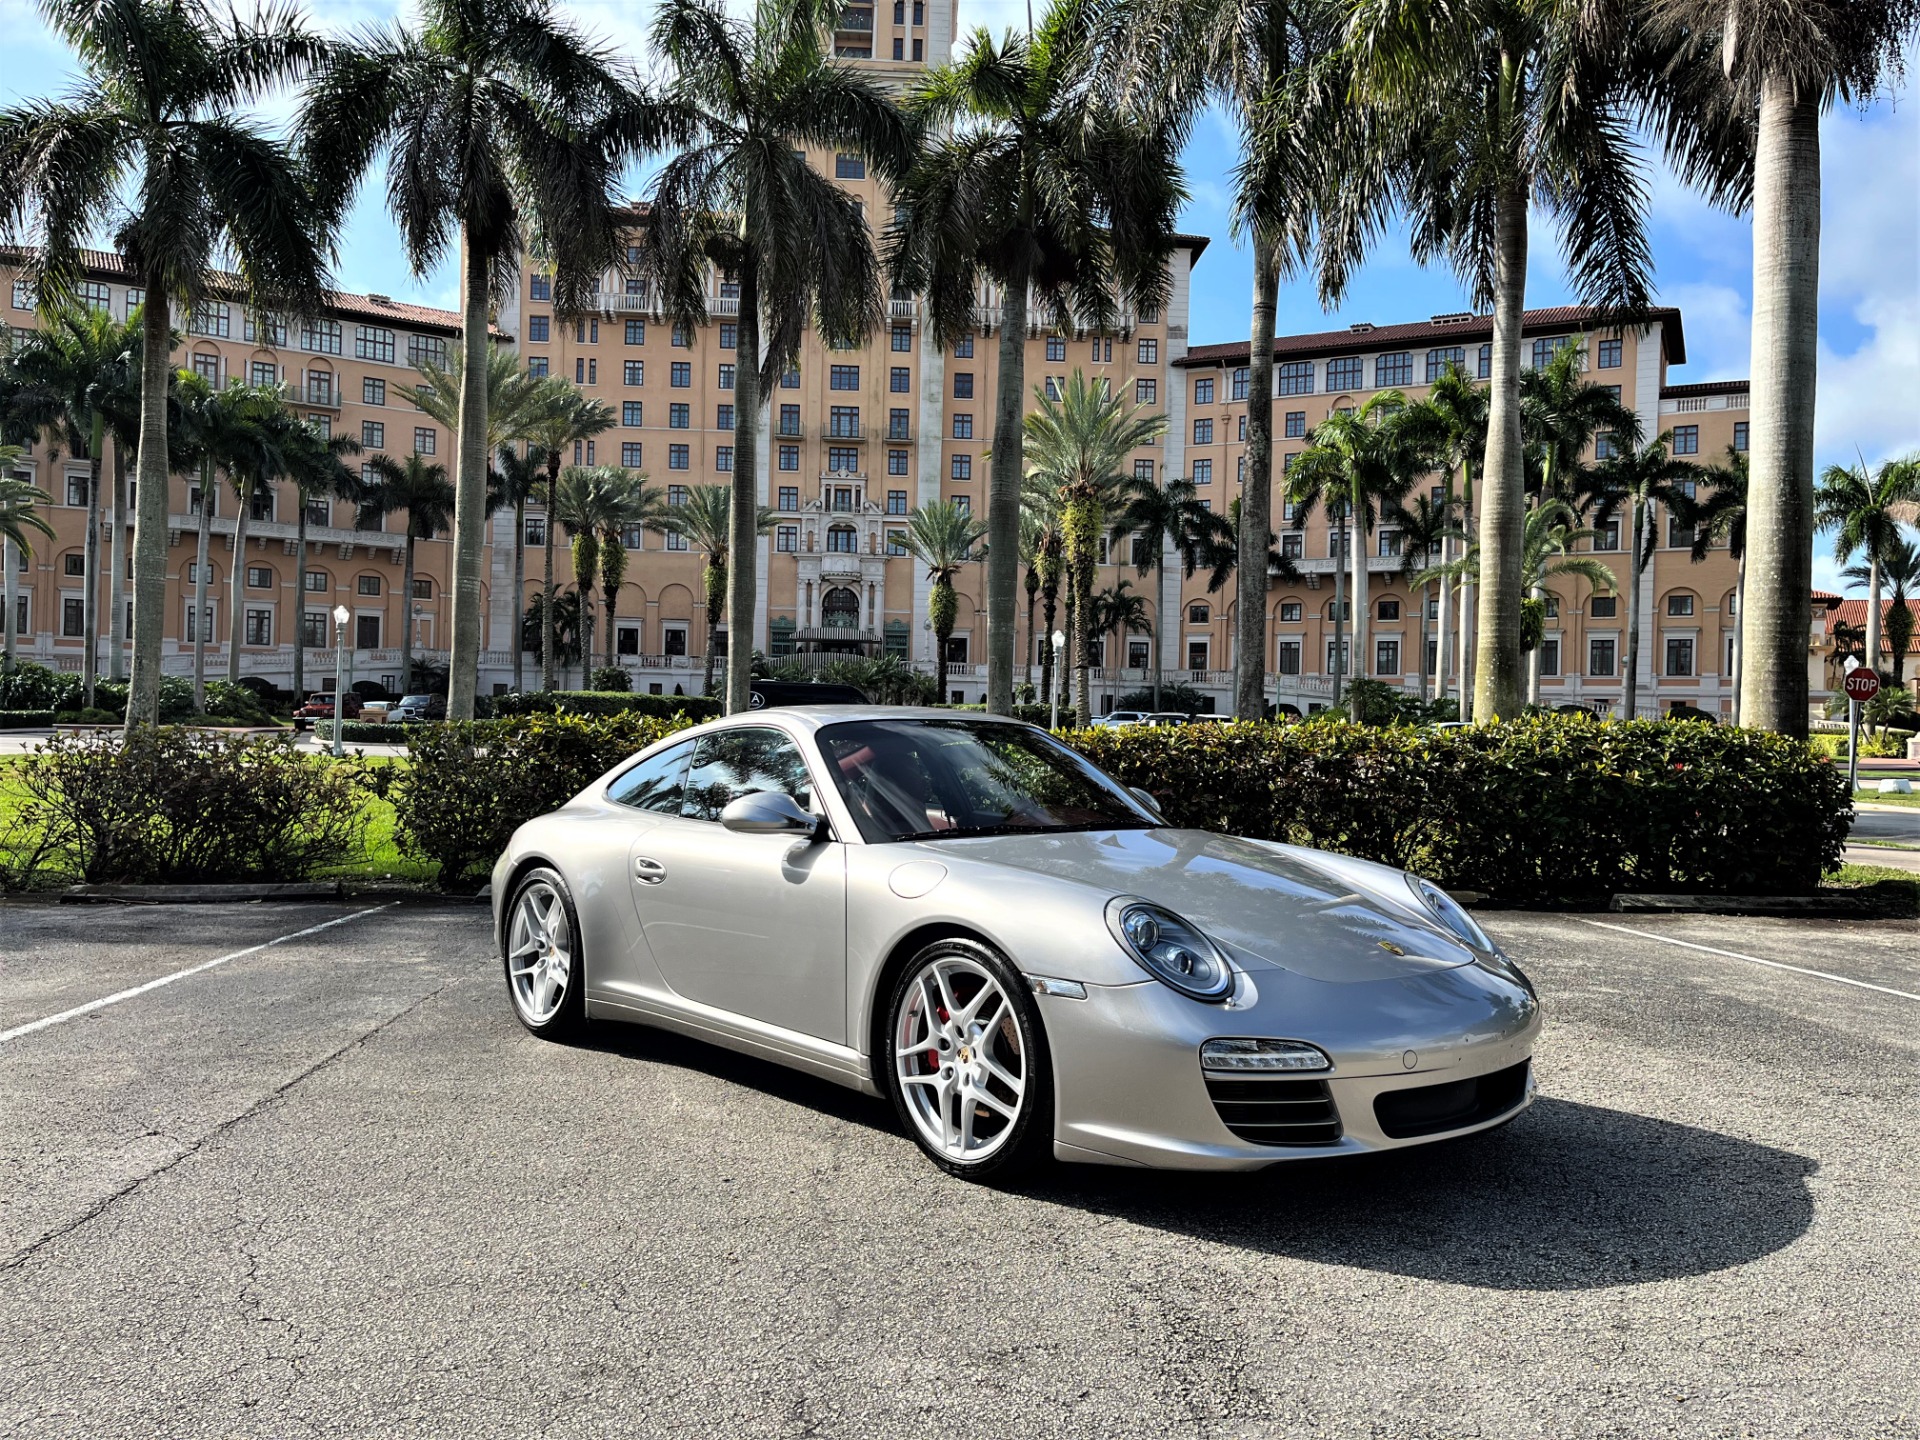 Used 2011 Porsche 911 Carrera 4S for sale Sold at The Gables Sports Cars in Miami FL 33146 1